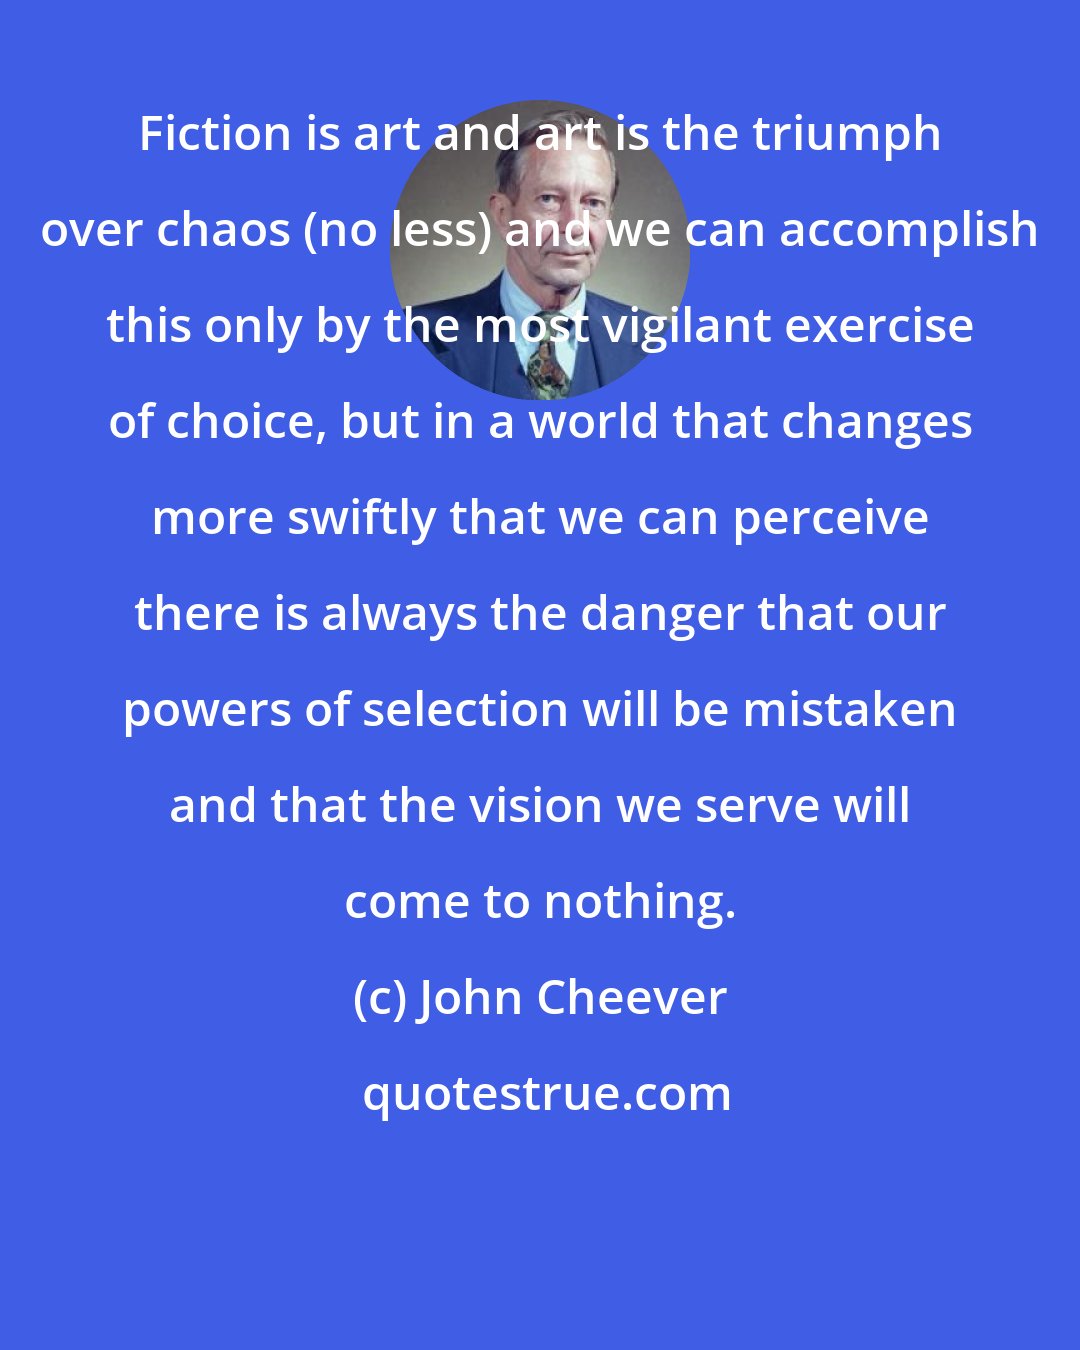 John Cheever: Fiction is art and art is the triumph over chaos (no less) and we can accomplish this only by the most vigilant exercise of choice, but in a world that changes more swiftly that we can perceive there is always the danger that our powers of selection will be mistaken and that the vision we serve will come to nothing.